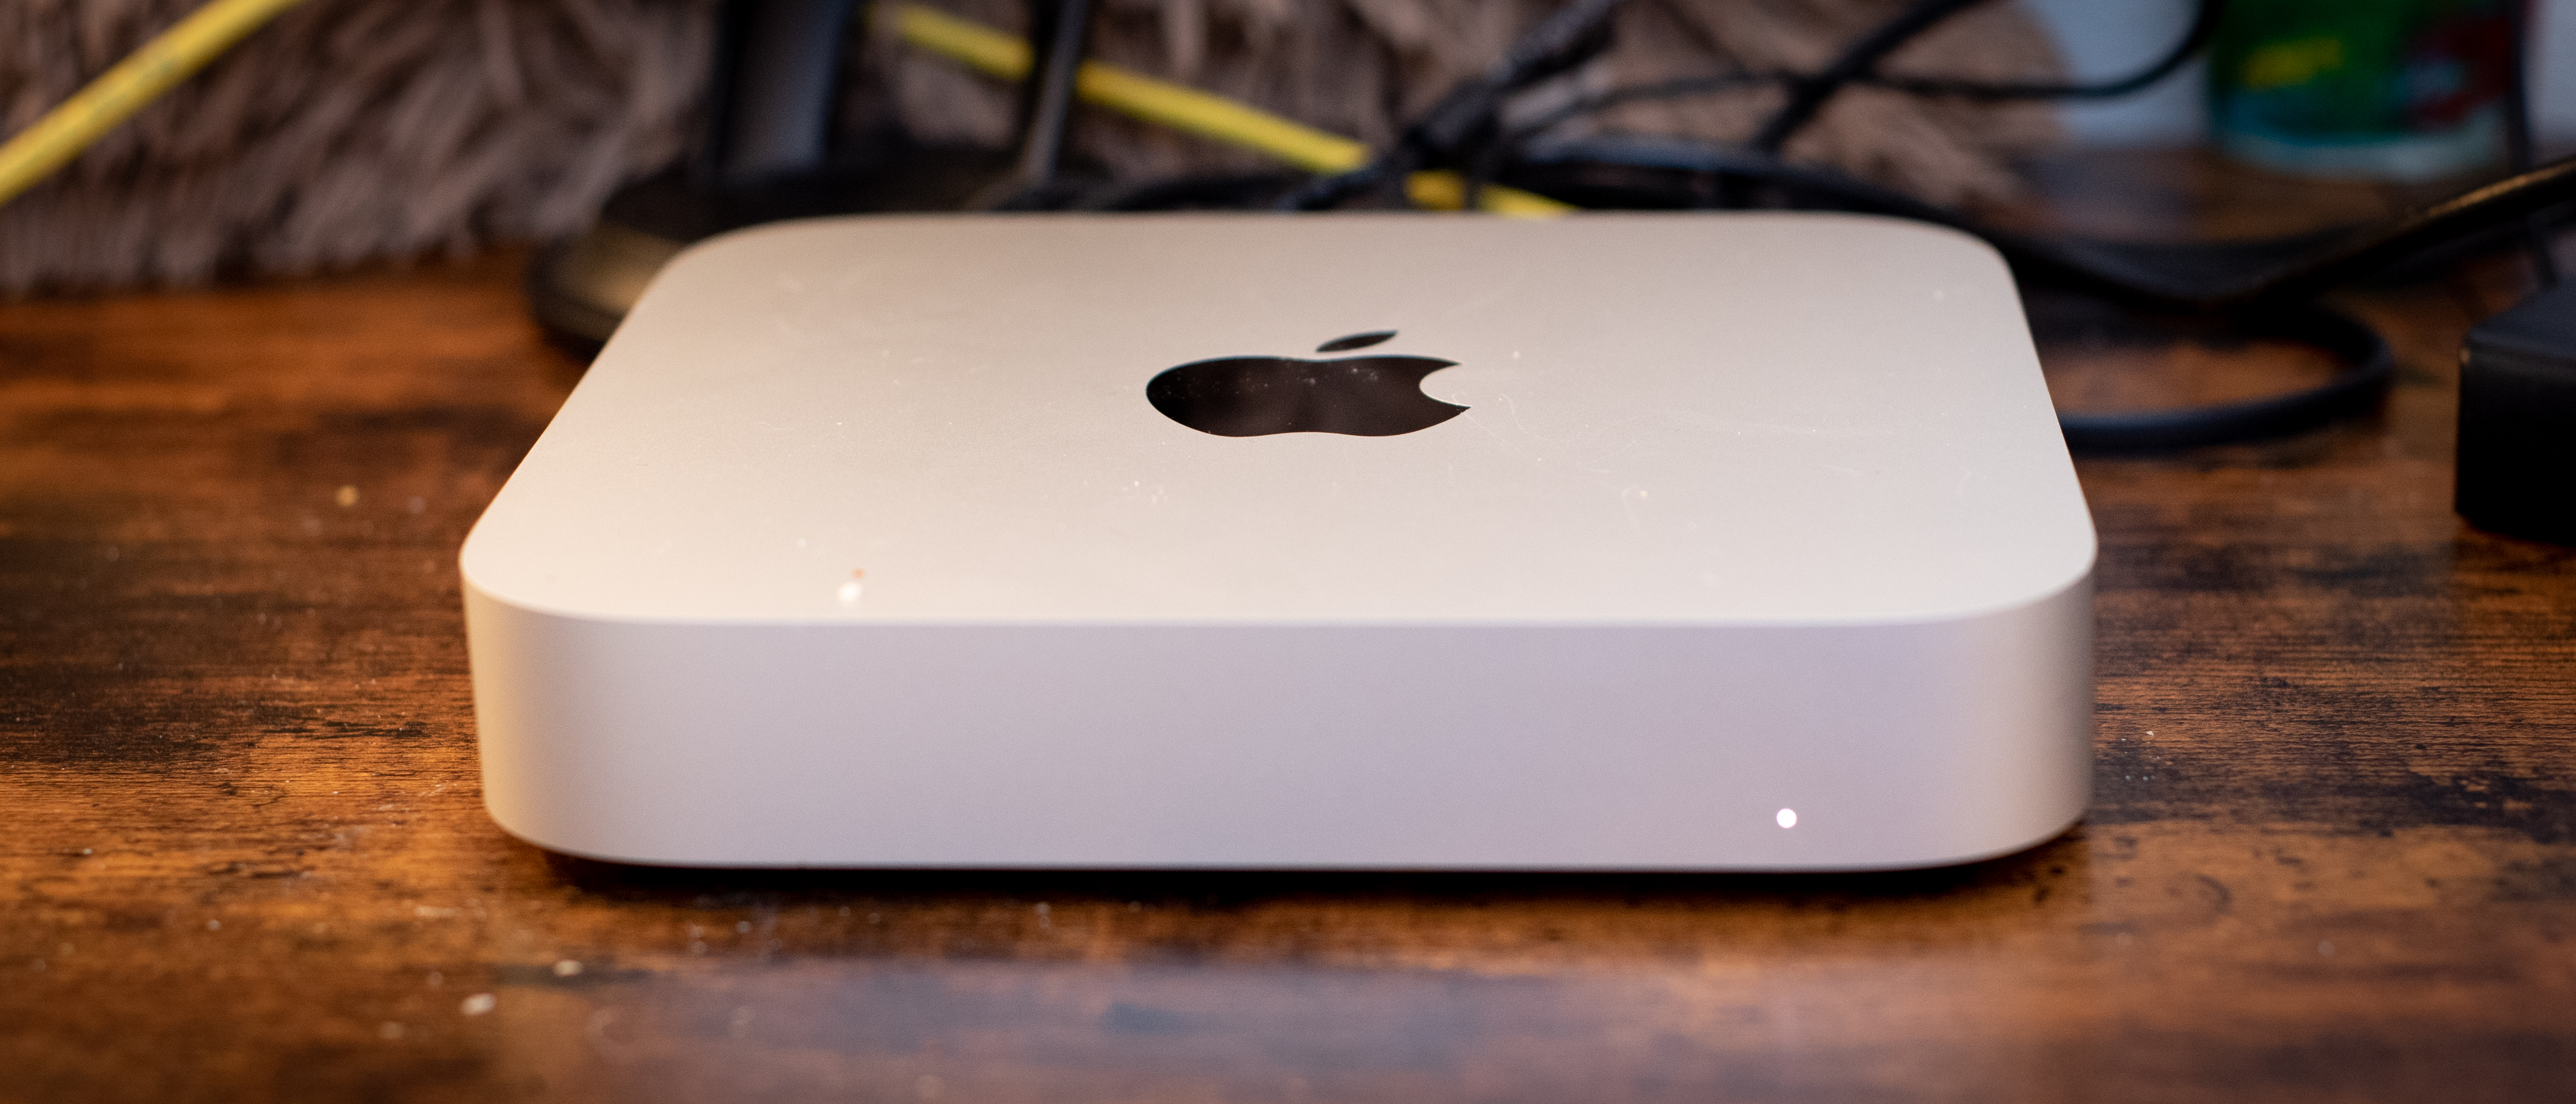 The Mac Mini is now one of Apple's fastest computers and I still can't  believe it